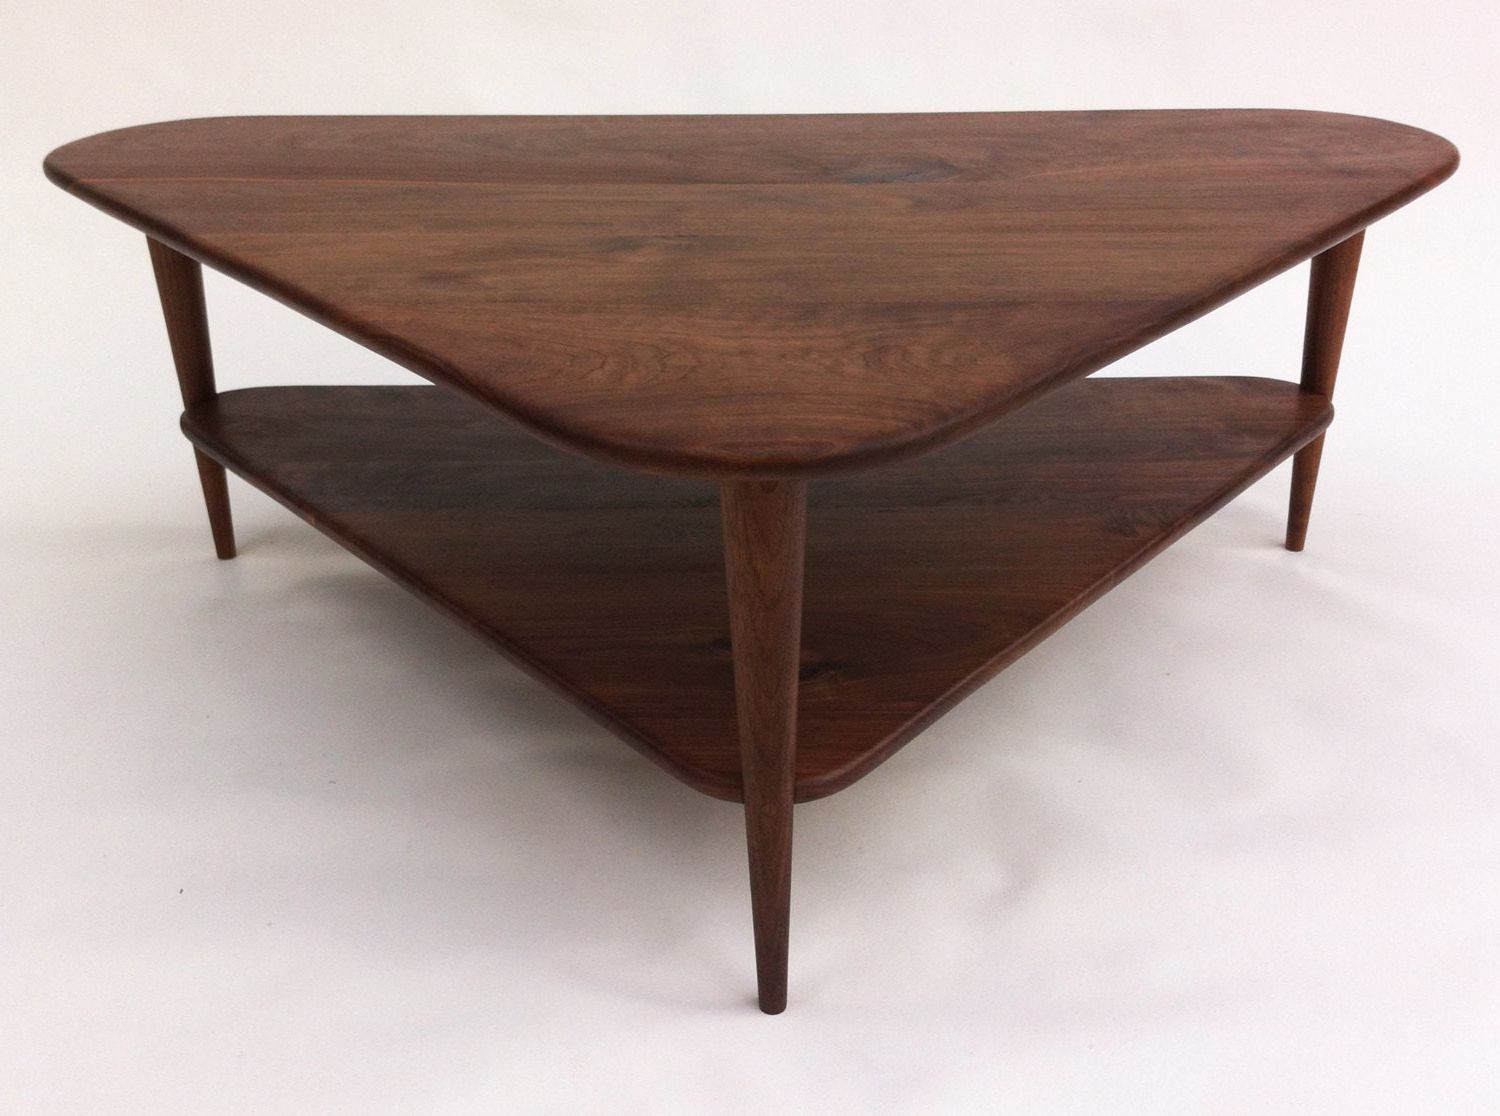 Well Known White Triangular Coffee Tables Inside Mid Century Modern Coffee Table W/ Shelf Triangle Cocktail (Gallery 13 of 20)